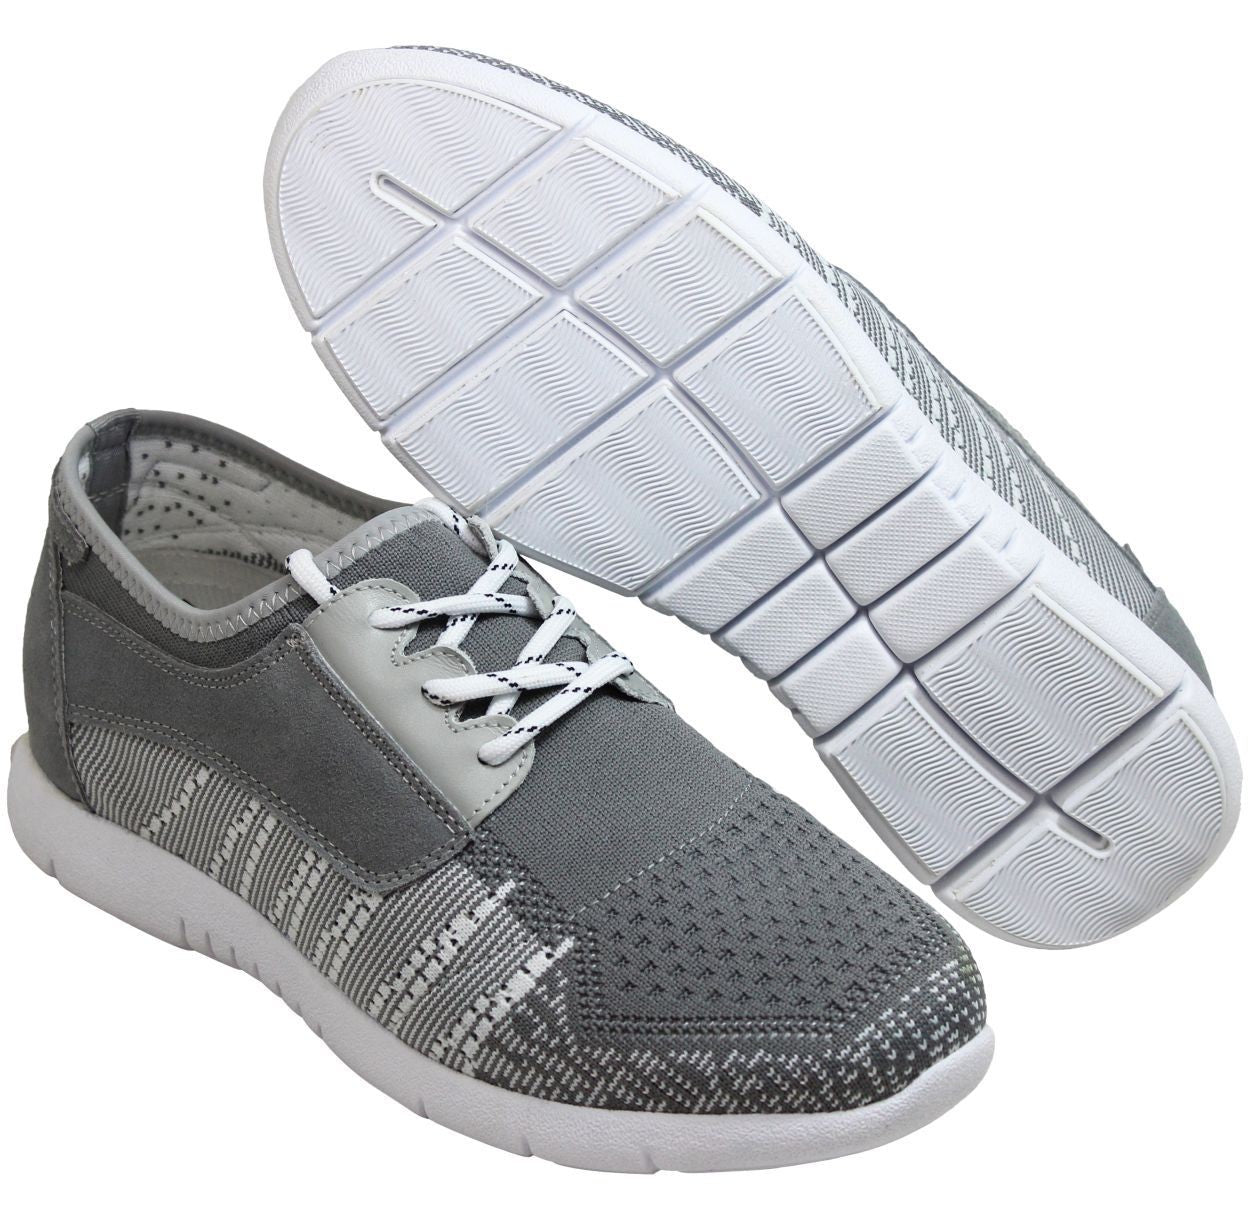 Elevator shoes height increase TOTO - D62108 - 2.8 Inches Taller (Grey/White) - Super Lightweight